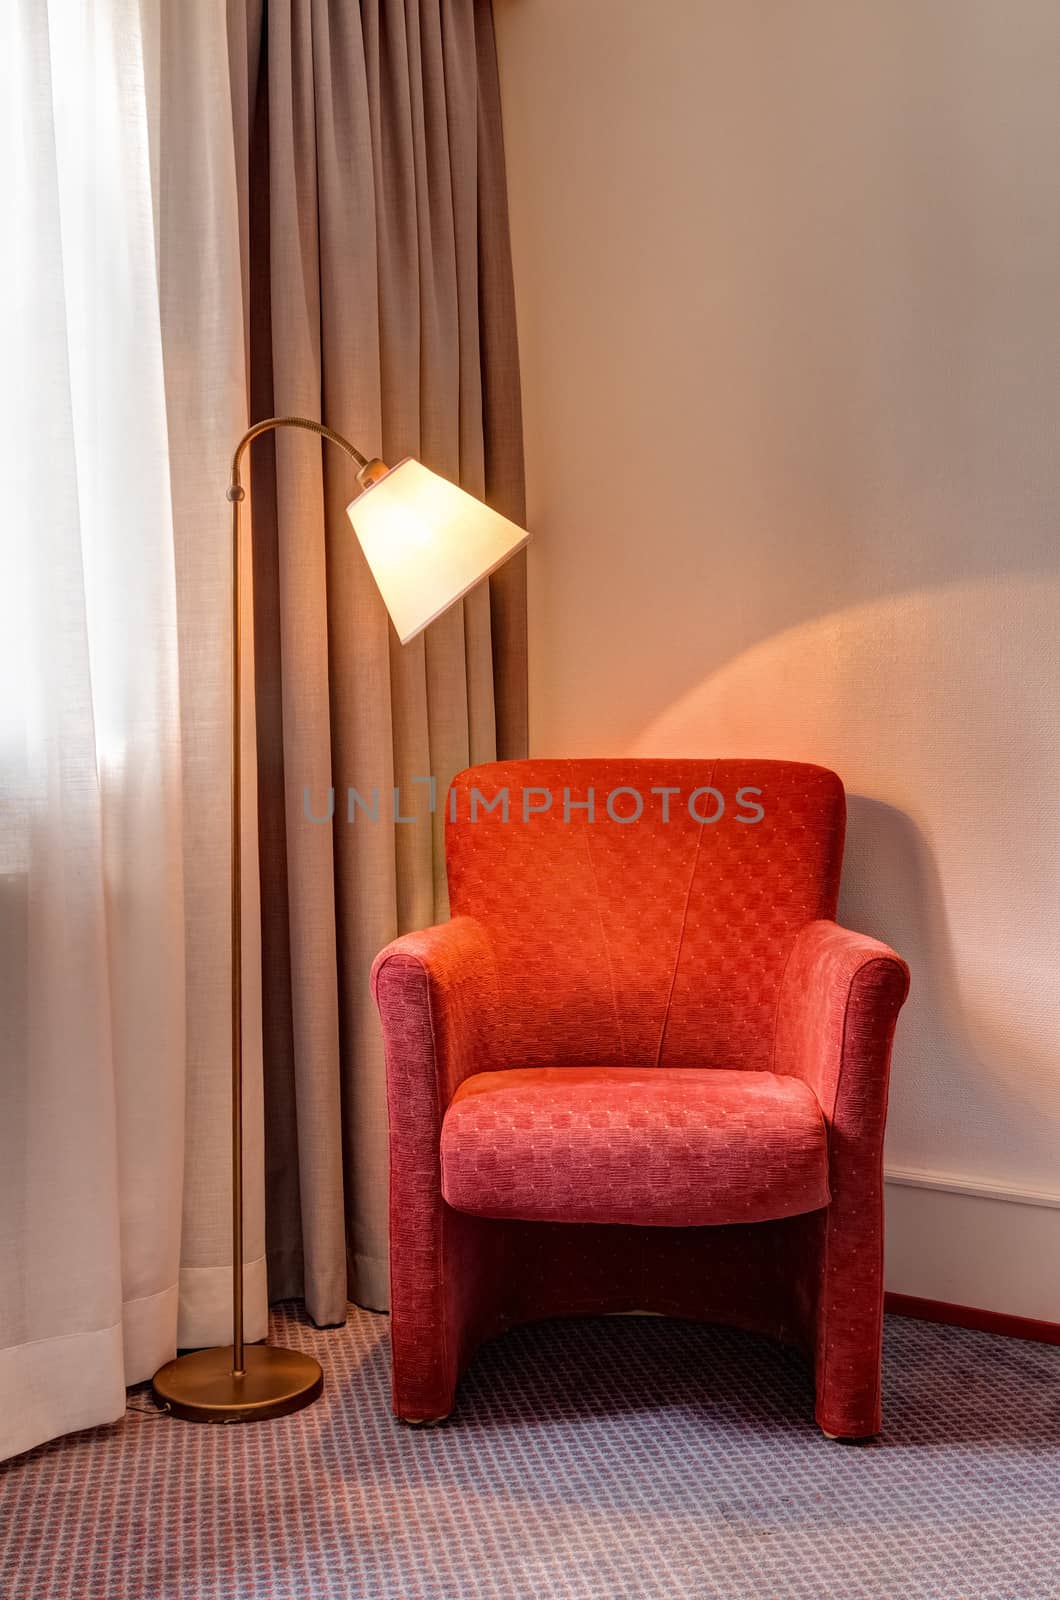 Red armchair and floor lamp in the corner of the room.